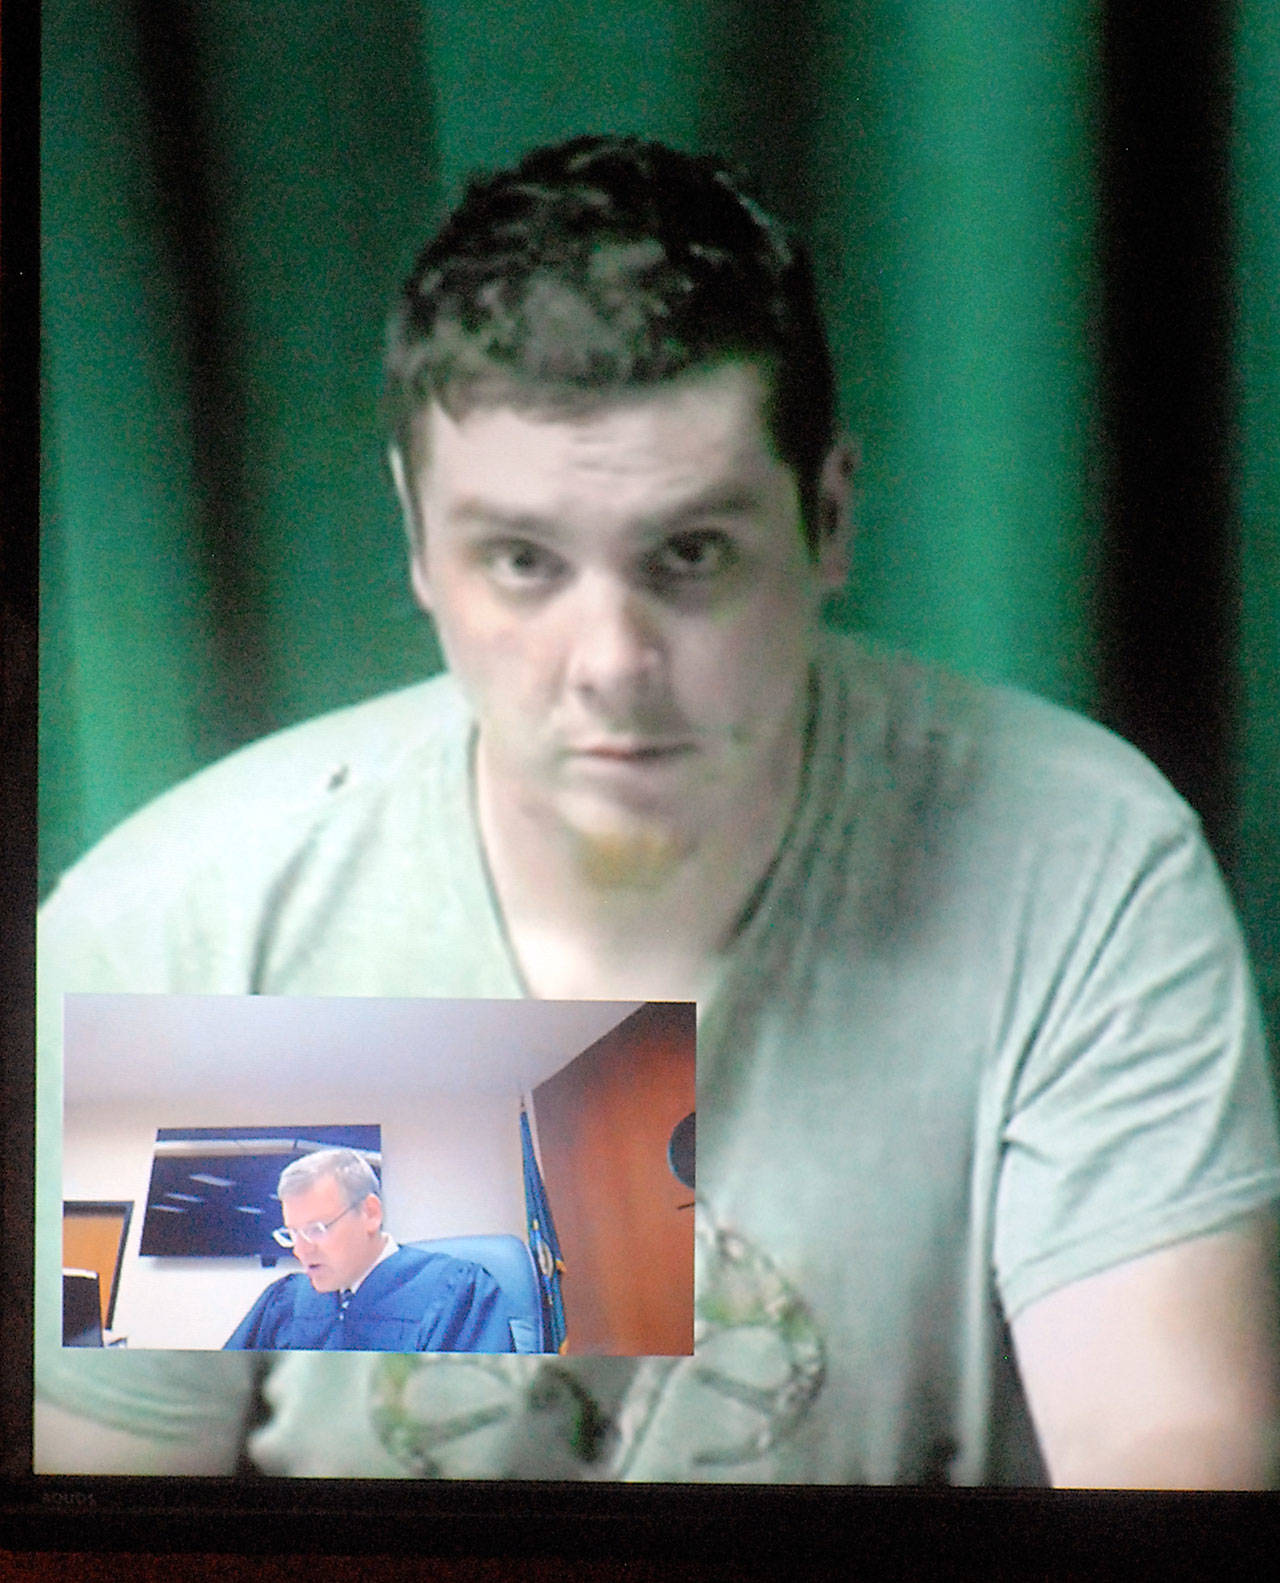 Jason Hutt appears by video link during his first appearance in Clallam County Superior Court on Tuesday. Judge Brent Basden is shown in the video inset. (Keith Thorpe/Peninsula Daily News)